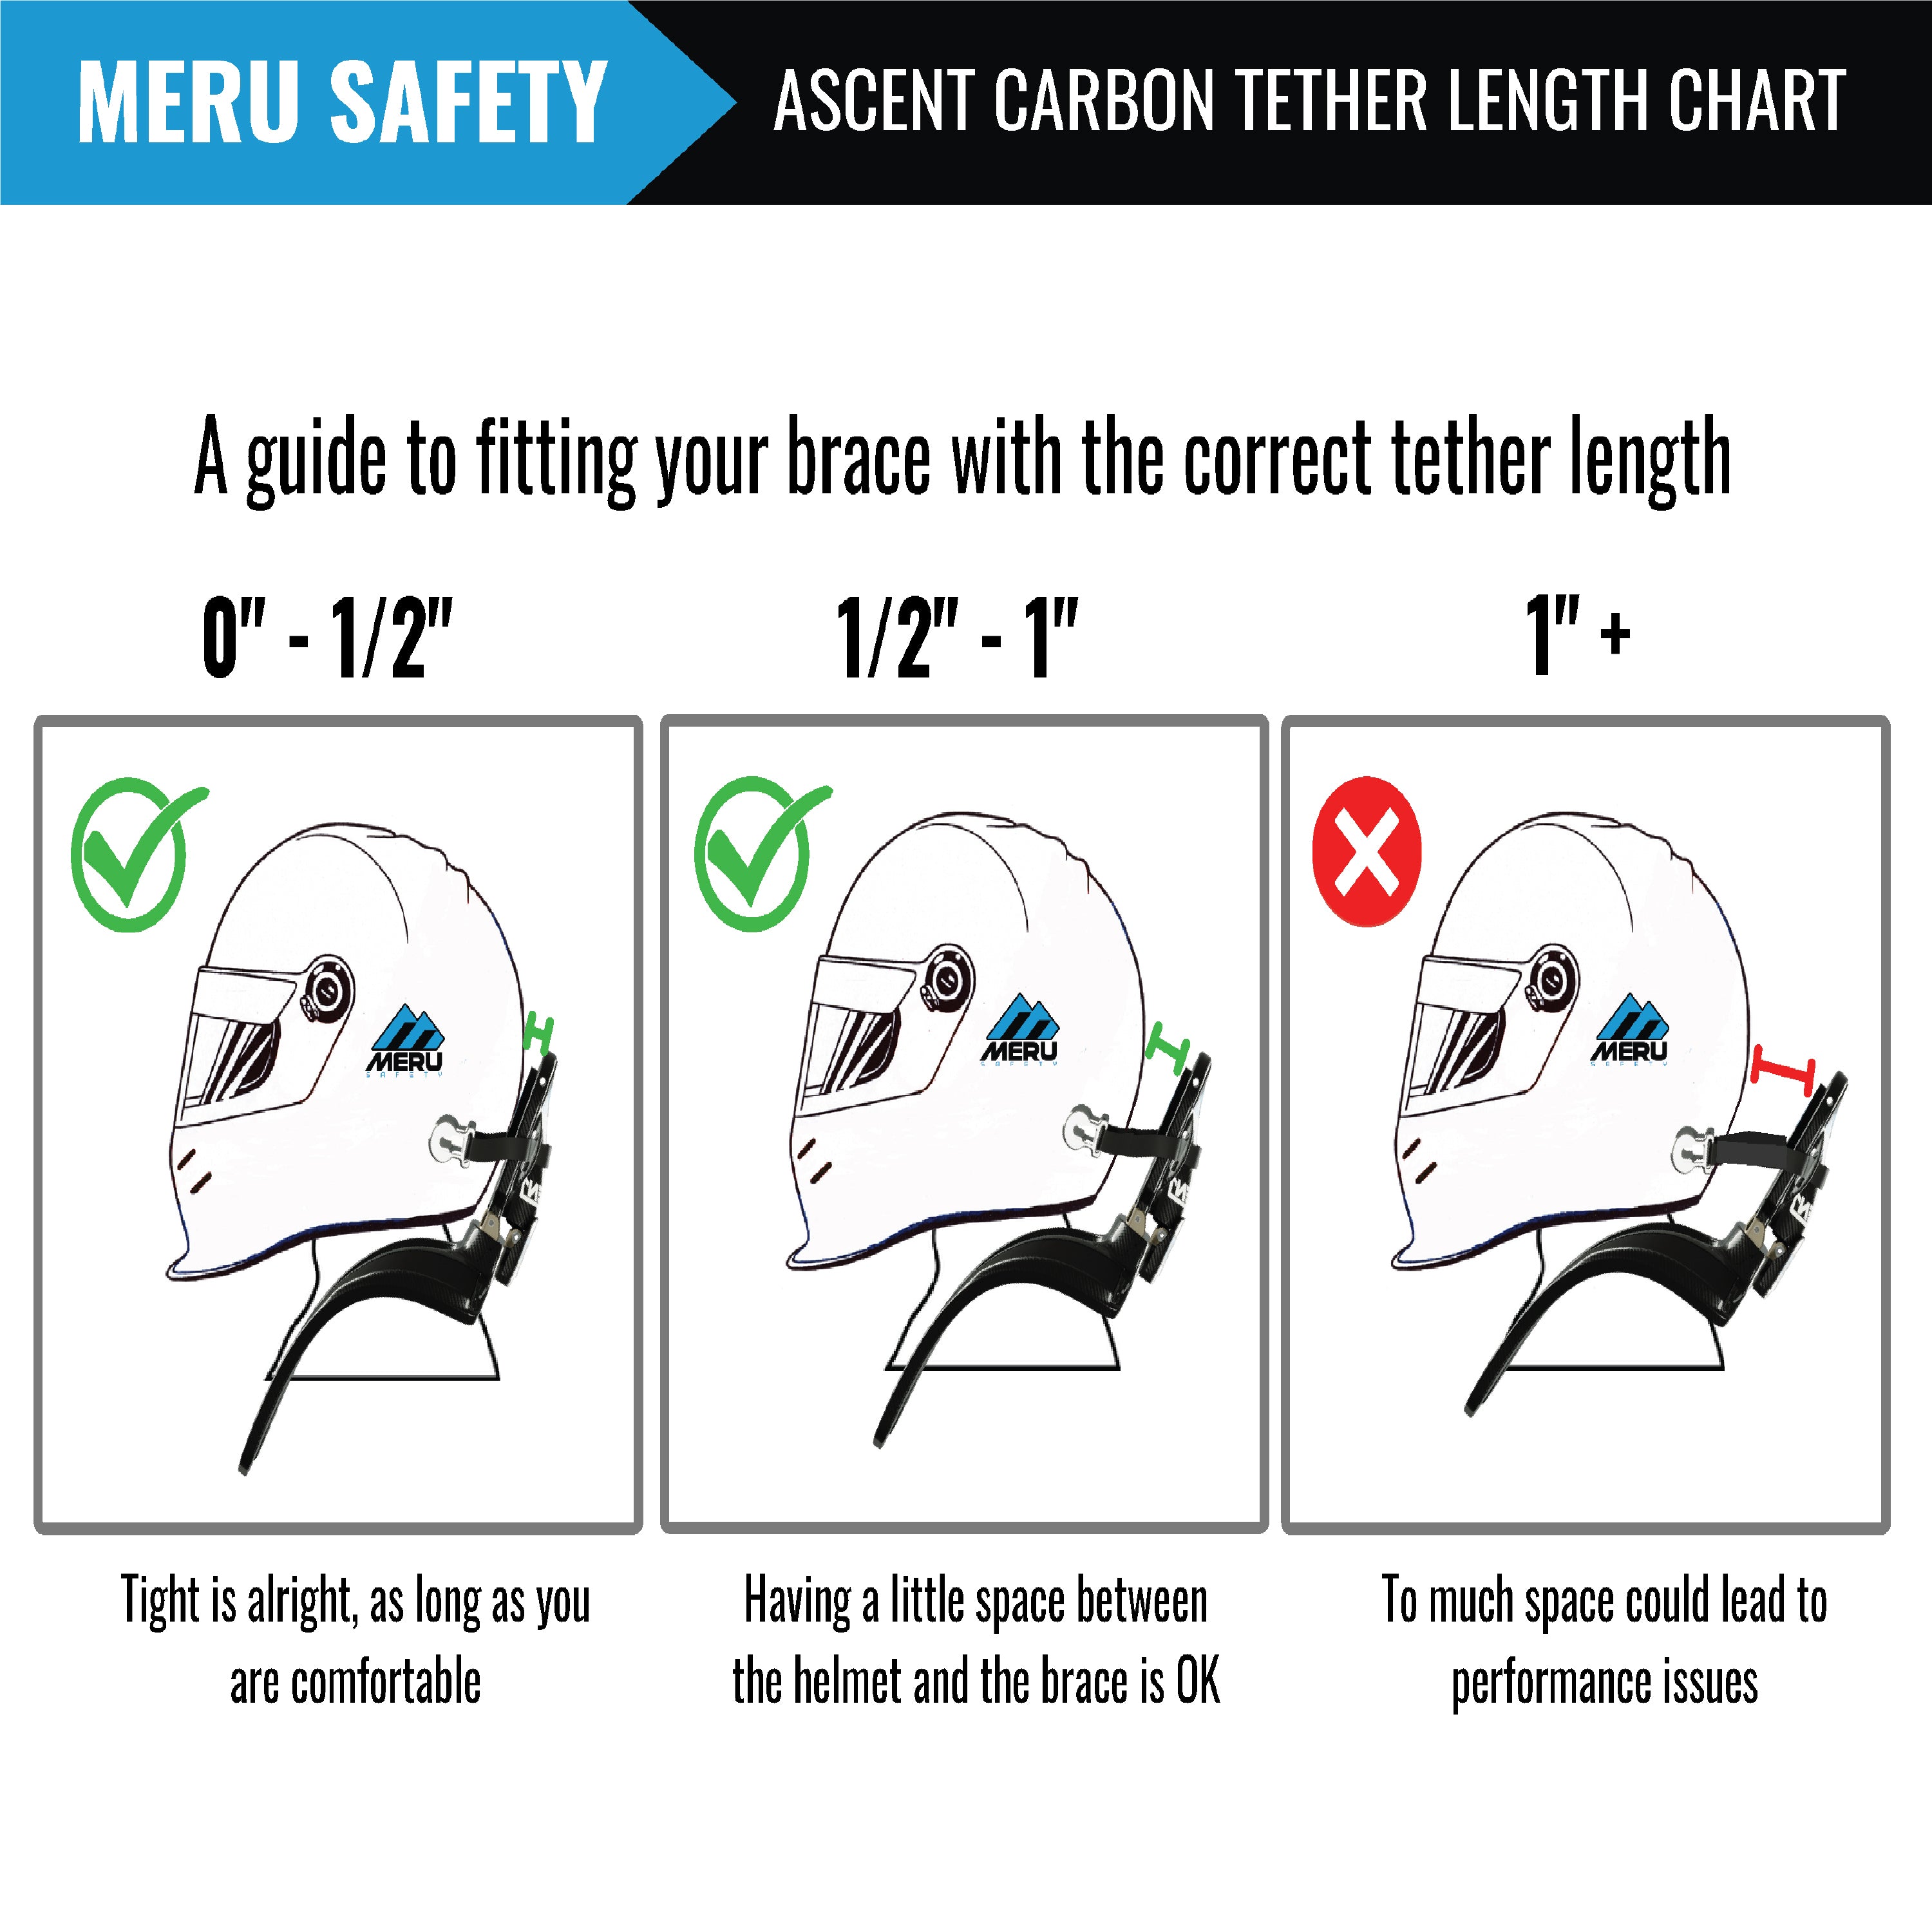 Meru Safety Racing Ascent Carbon Head & Neck Restraint with Quick Release Tethers & Shock Absorber Reduces Force from Frontal Impacts (Large/X-Large)